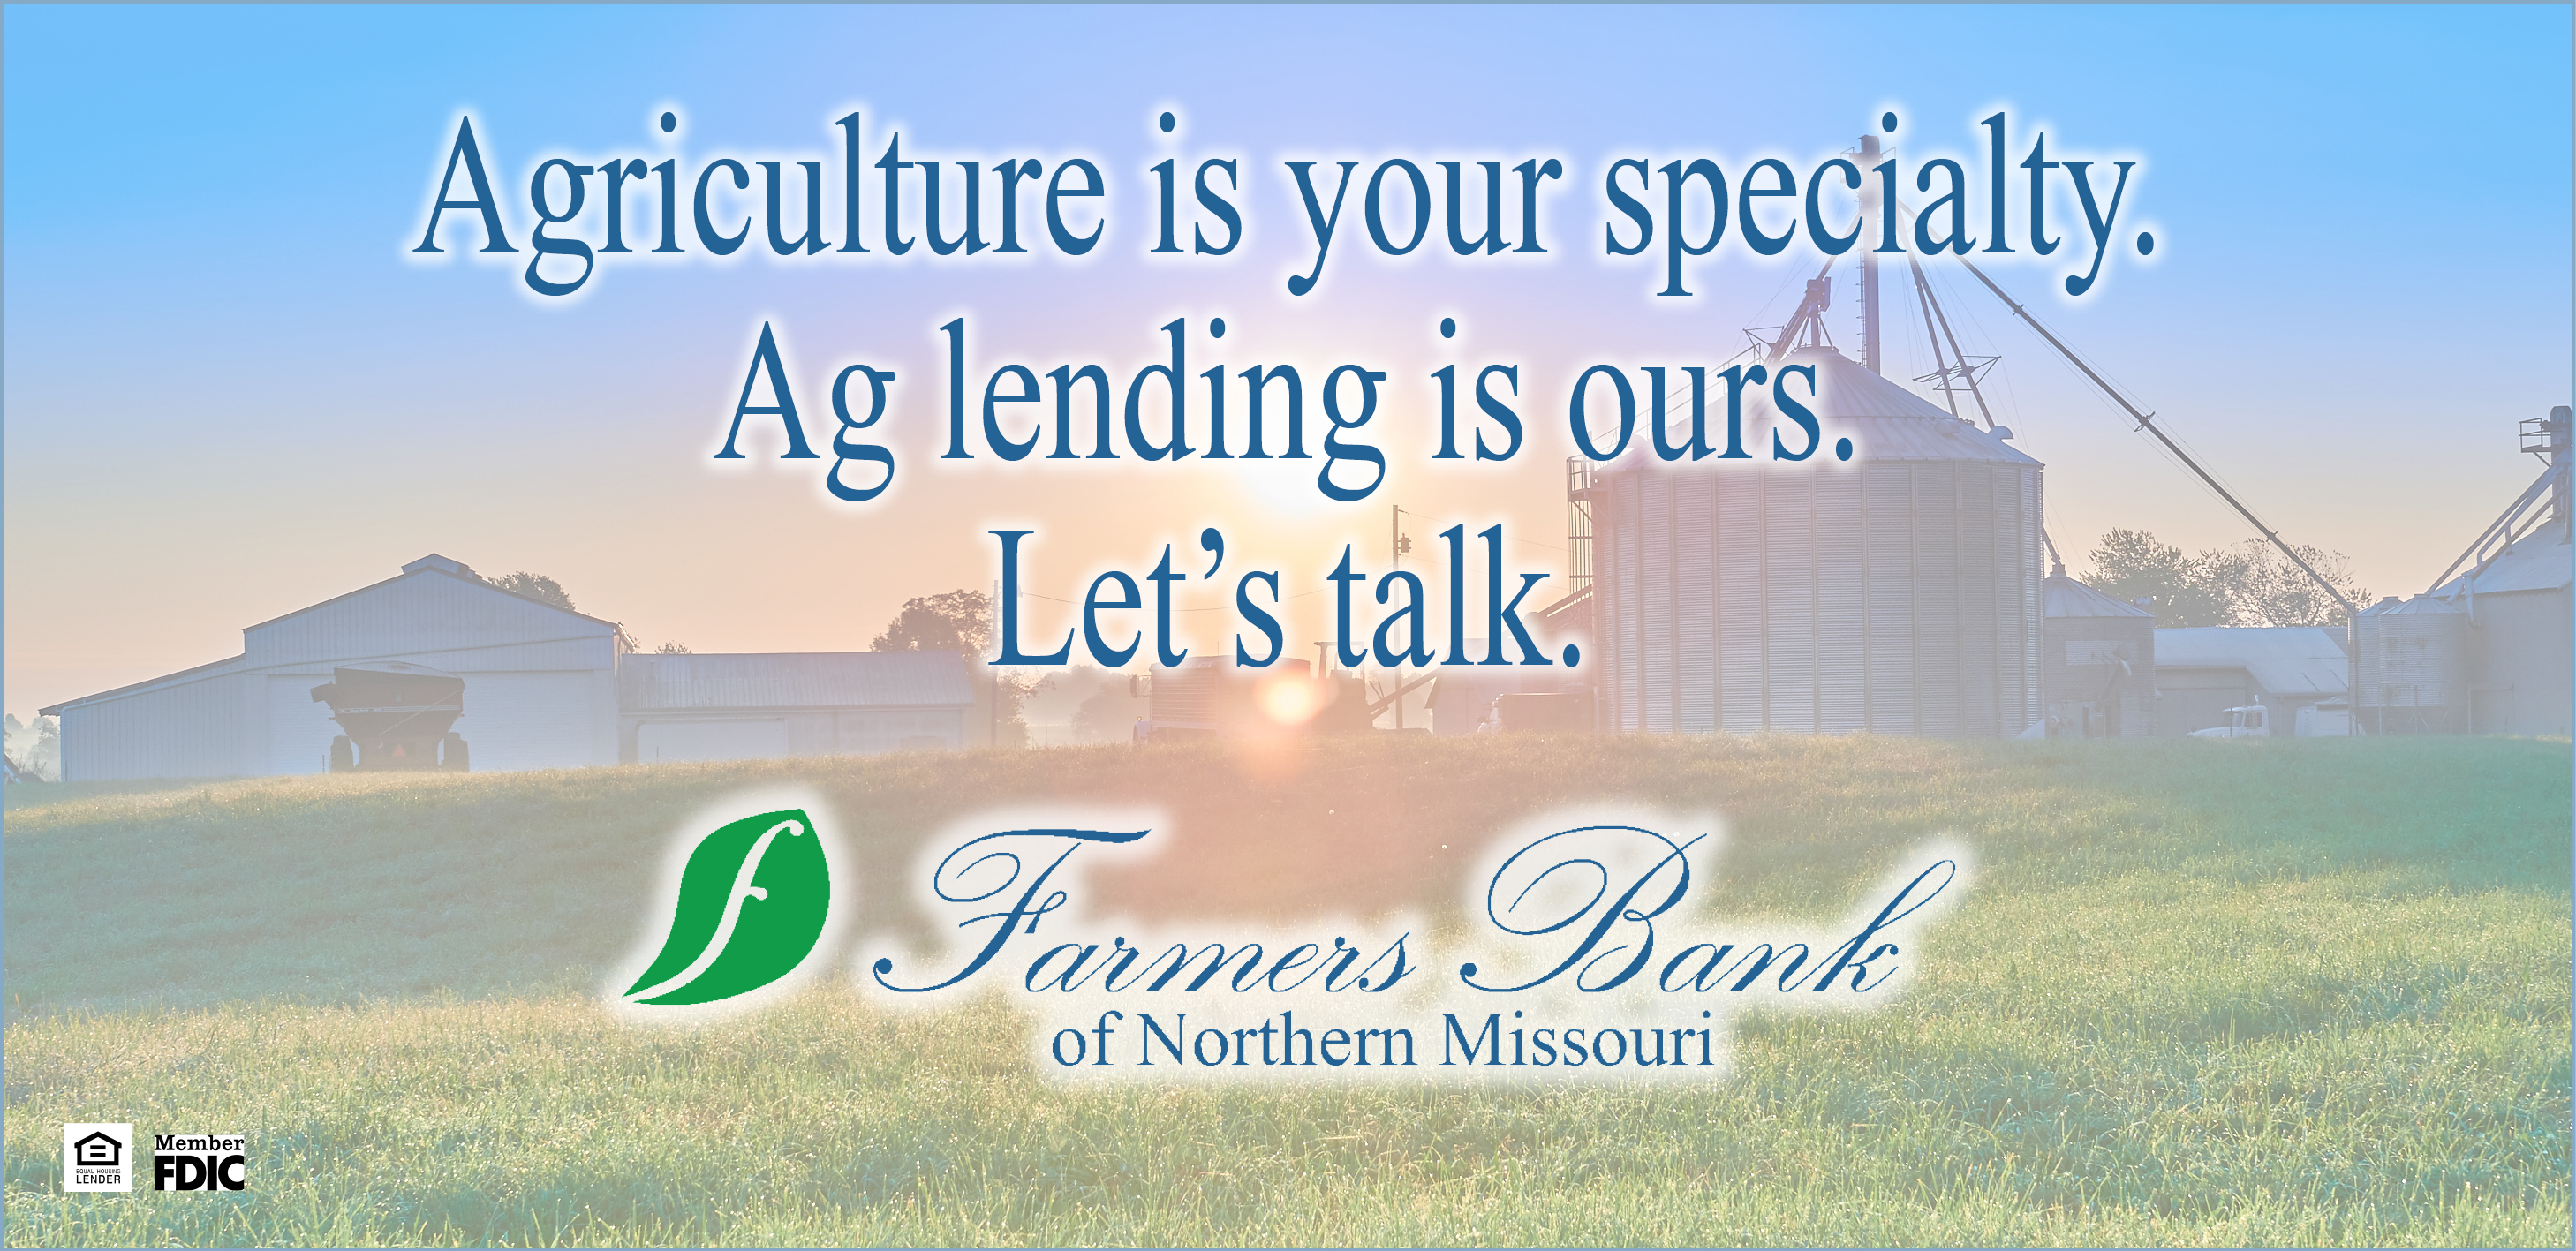 Agriculture is your specialty. Ag lending is ours. Let's talk. Farmers Bank of Northern Missouri, Member FDIC, Equal Housing Lender